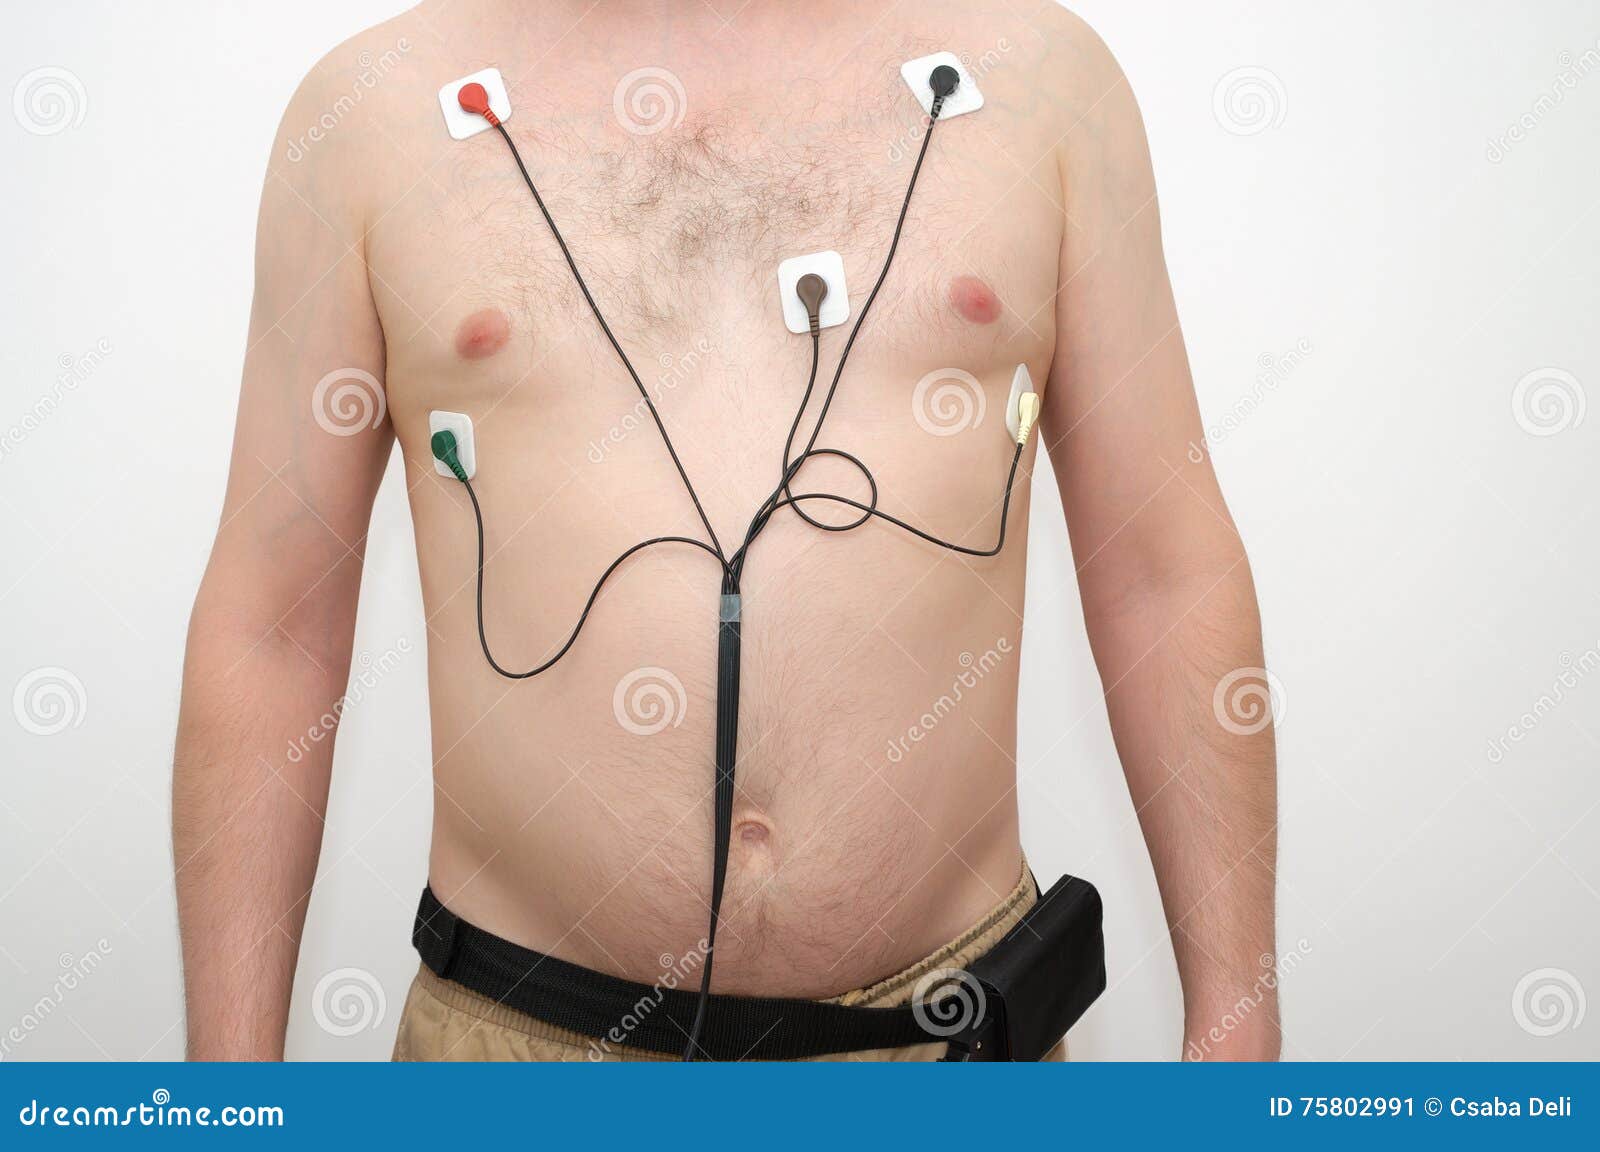 man wearing holter monitor